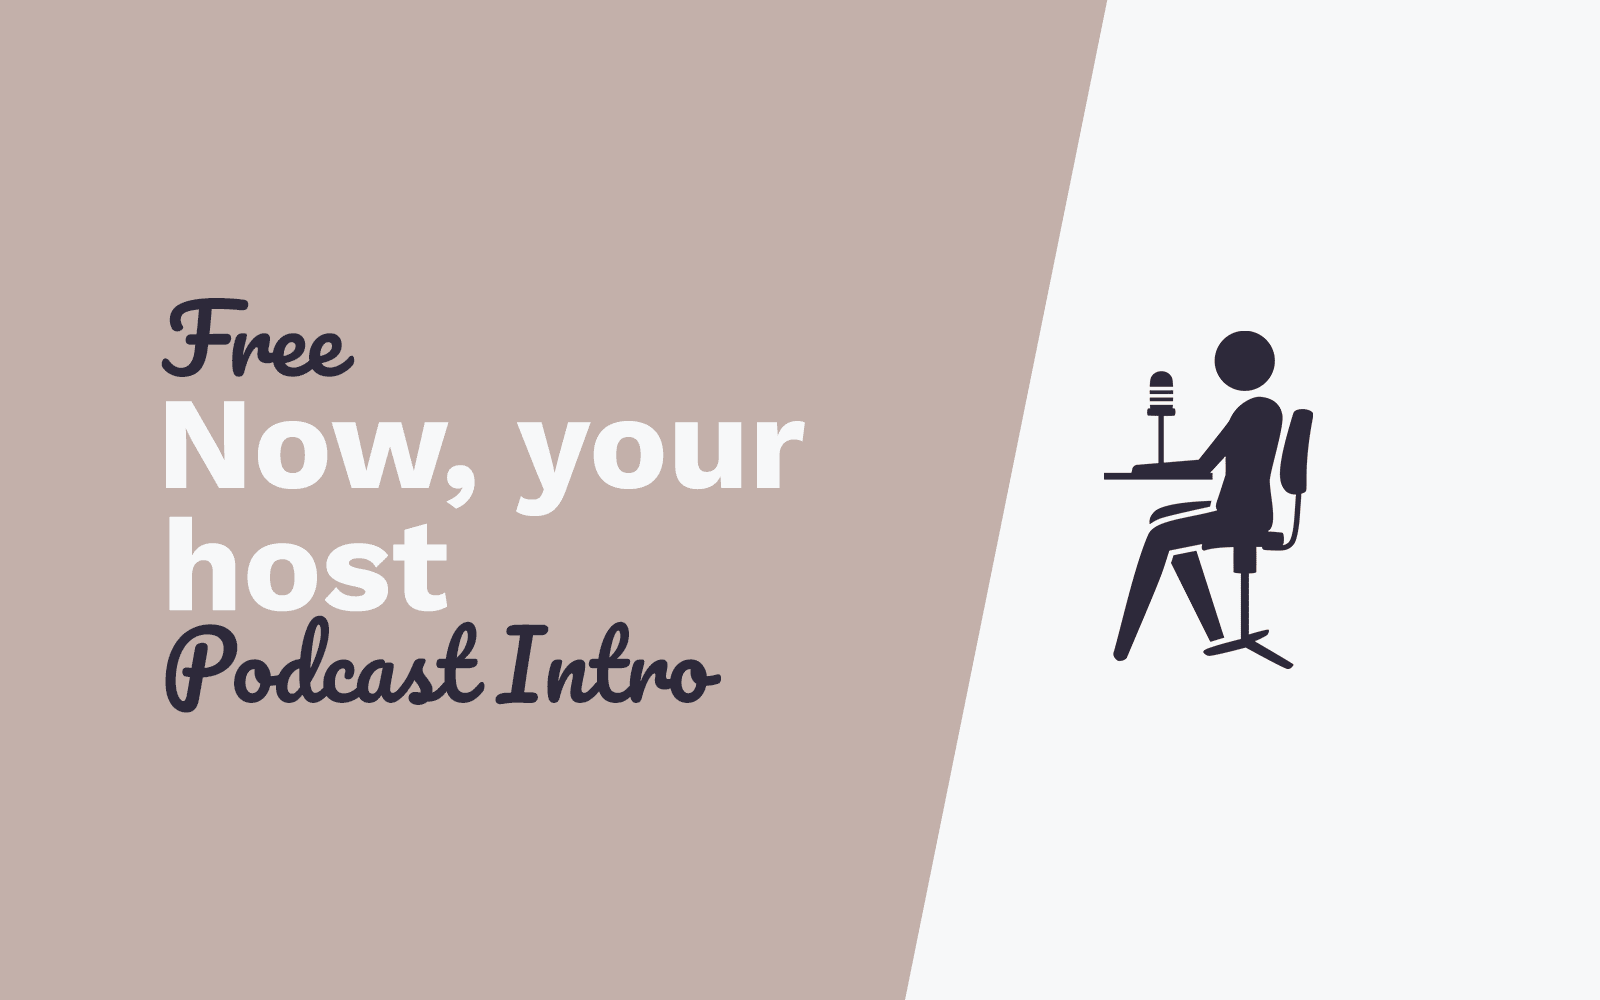 Free Podcast Intro And Now Your Host Instant Download